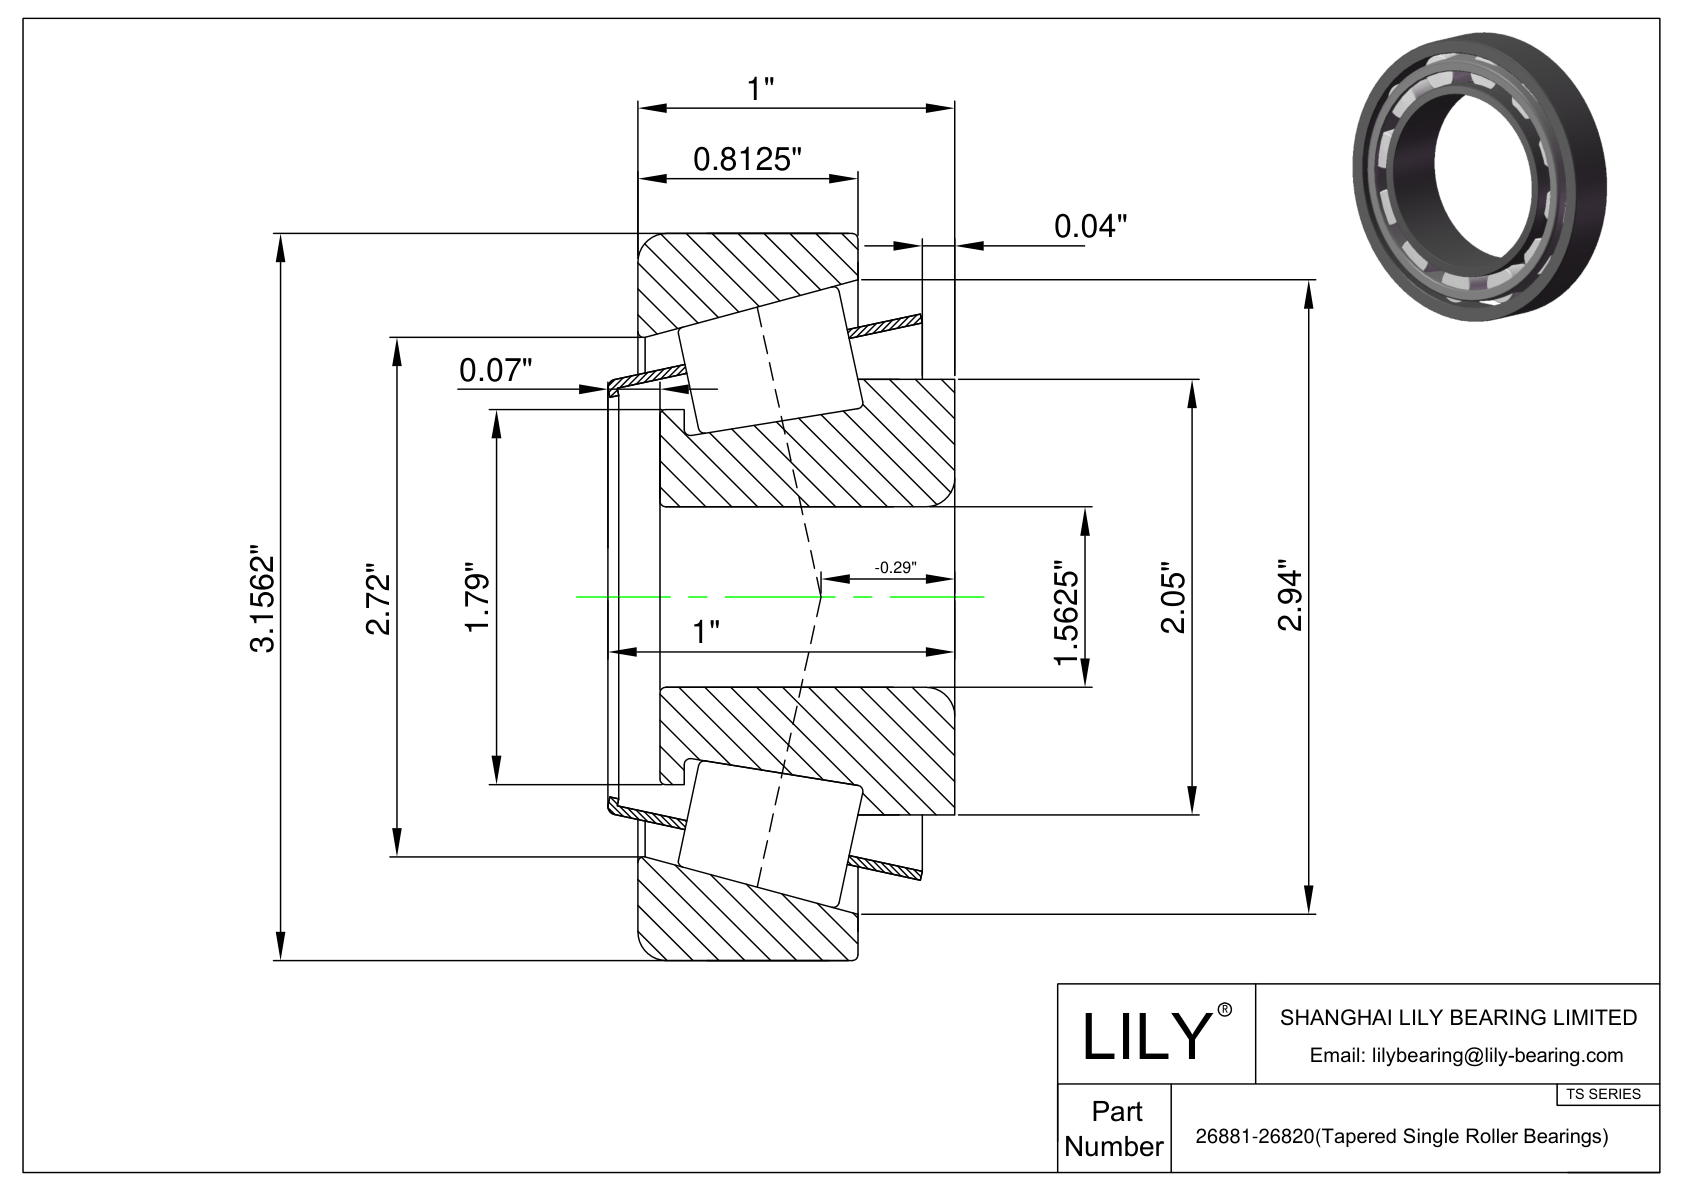 26881-26820 TS (Tapered Single Roller Bearings) (Imperial) cad drawing